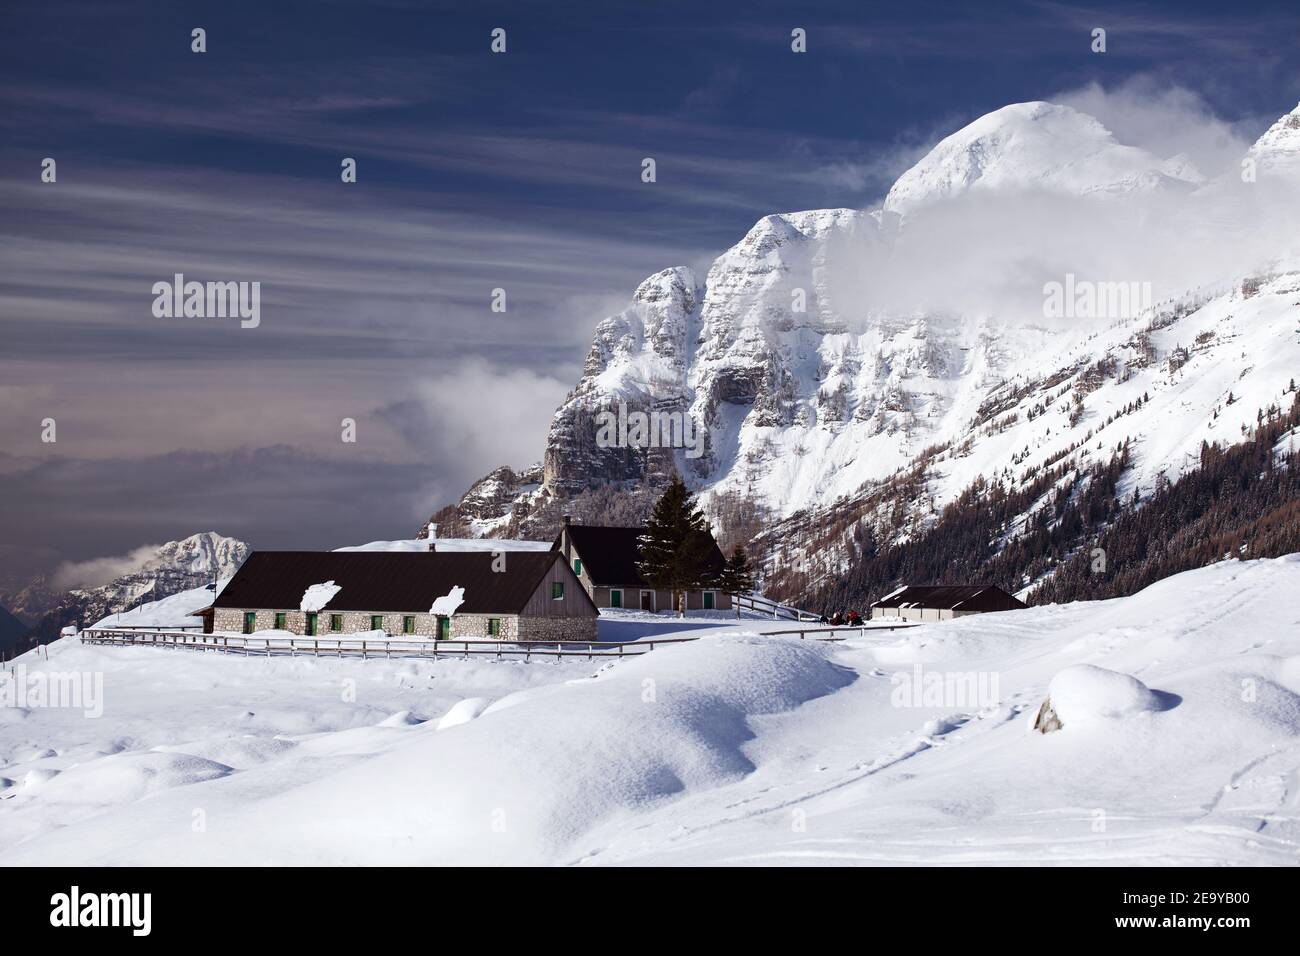 Mountain farm in winter with snowy surroundings and high mountain background Stock Photo